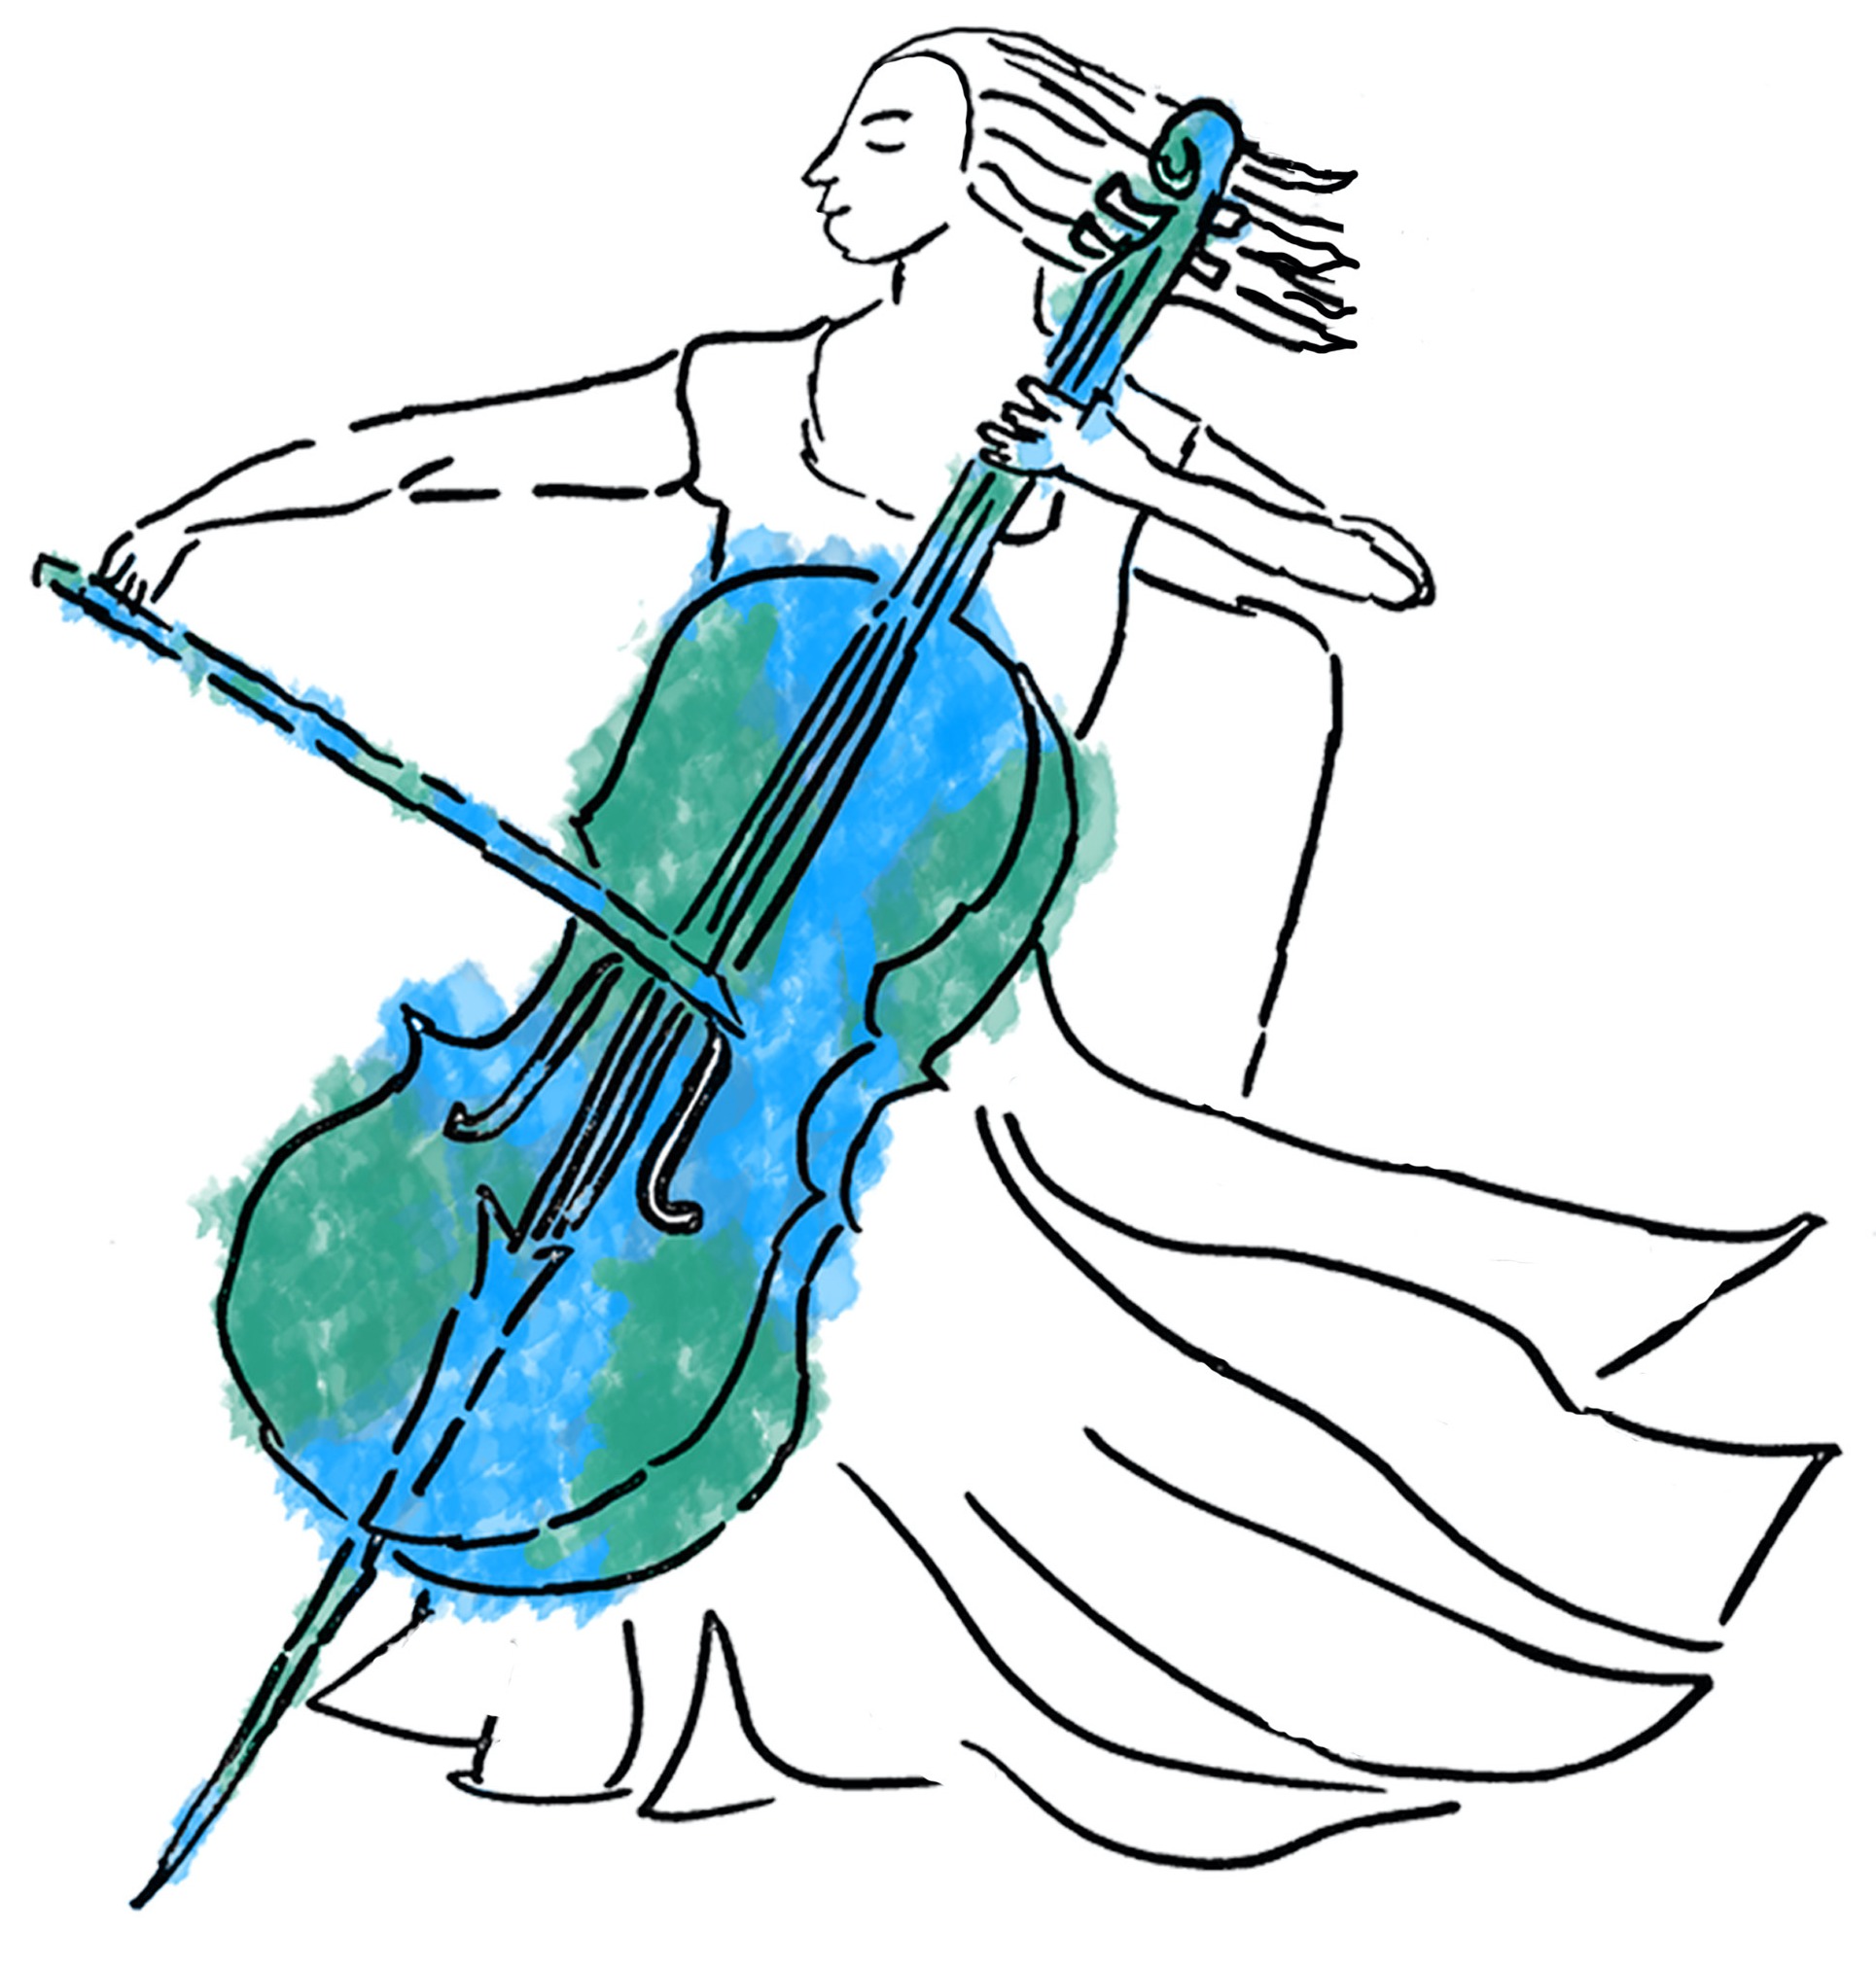 Logo of cellist playing a cello that is colored green and blue like the Earth.